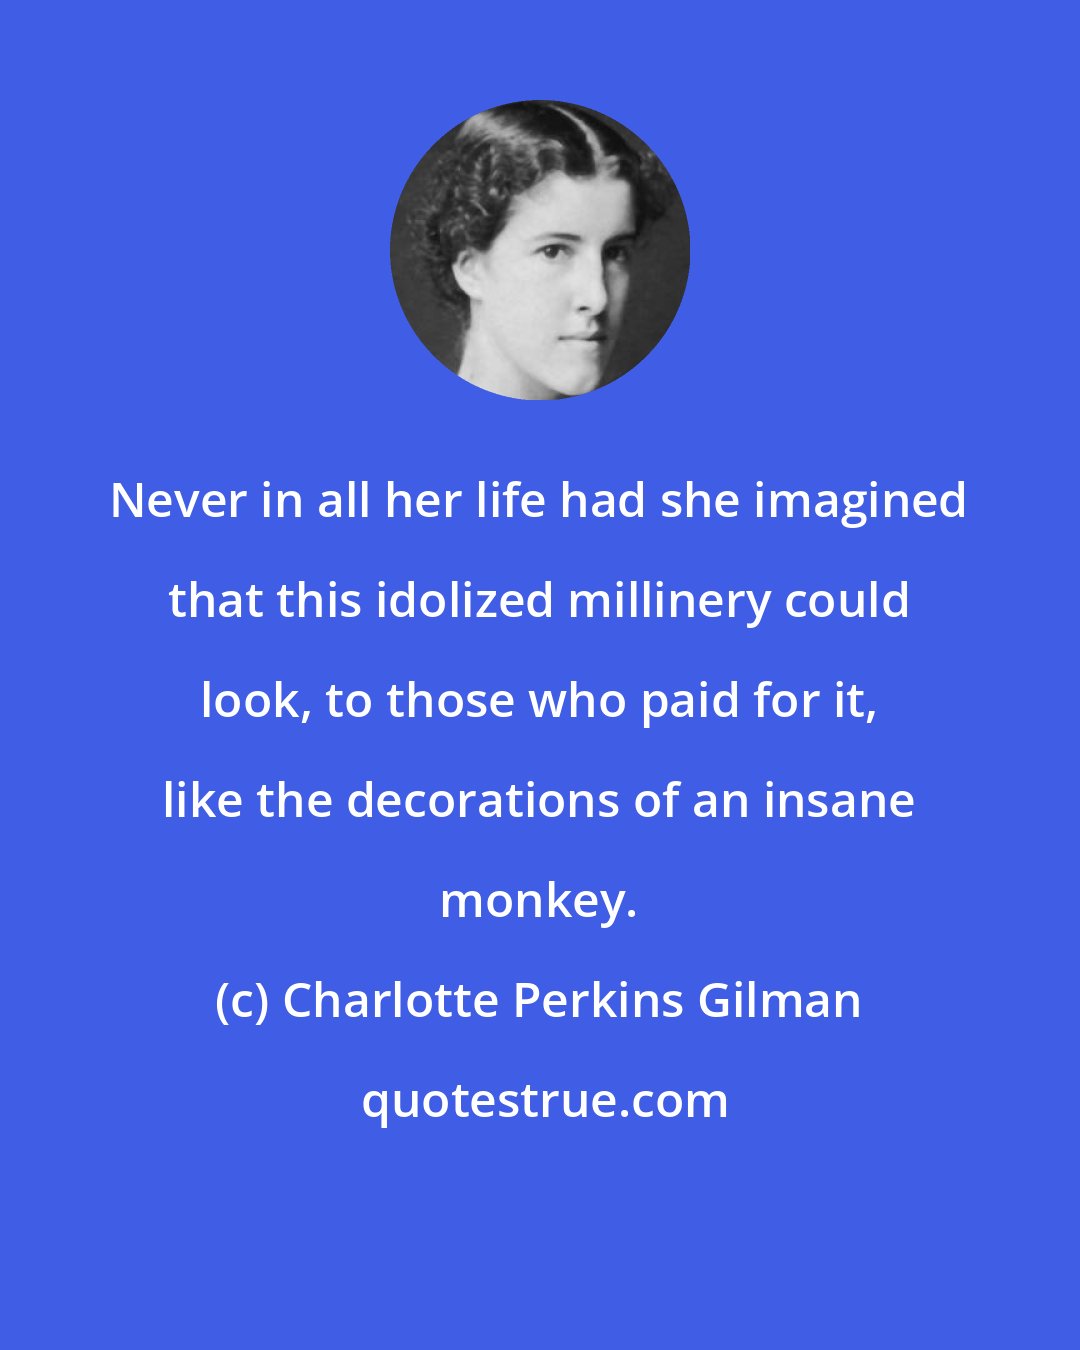 Charlotte Perkins Gilman: Never in all her life had she imagined that this idolized millinery could look, to those who paid for it, like the decorations of an insane monkey.